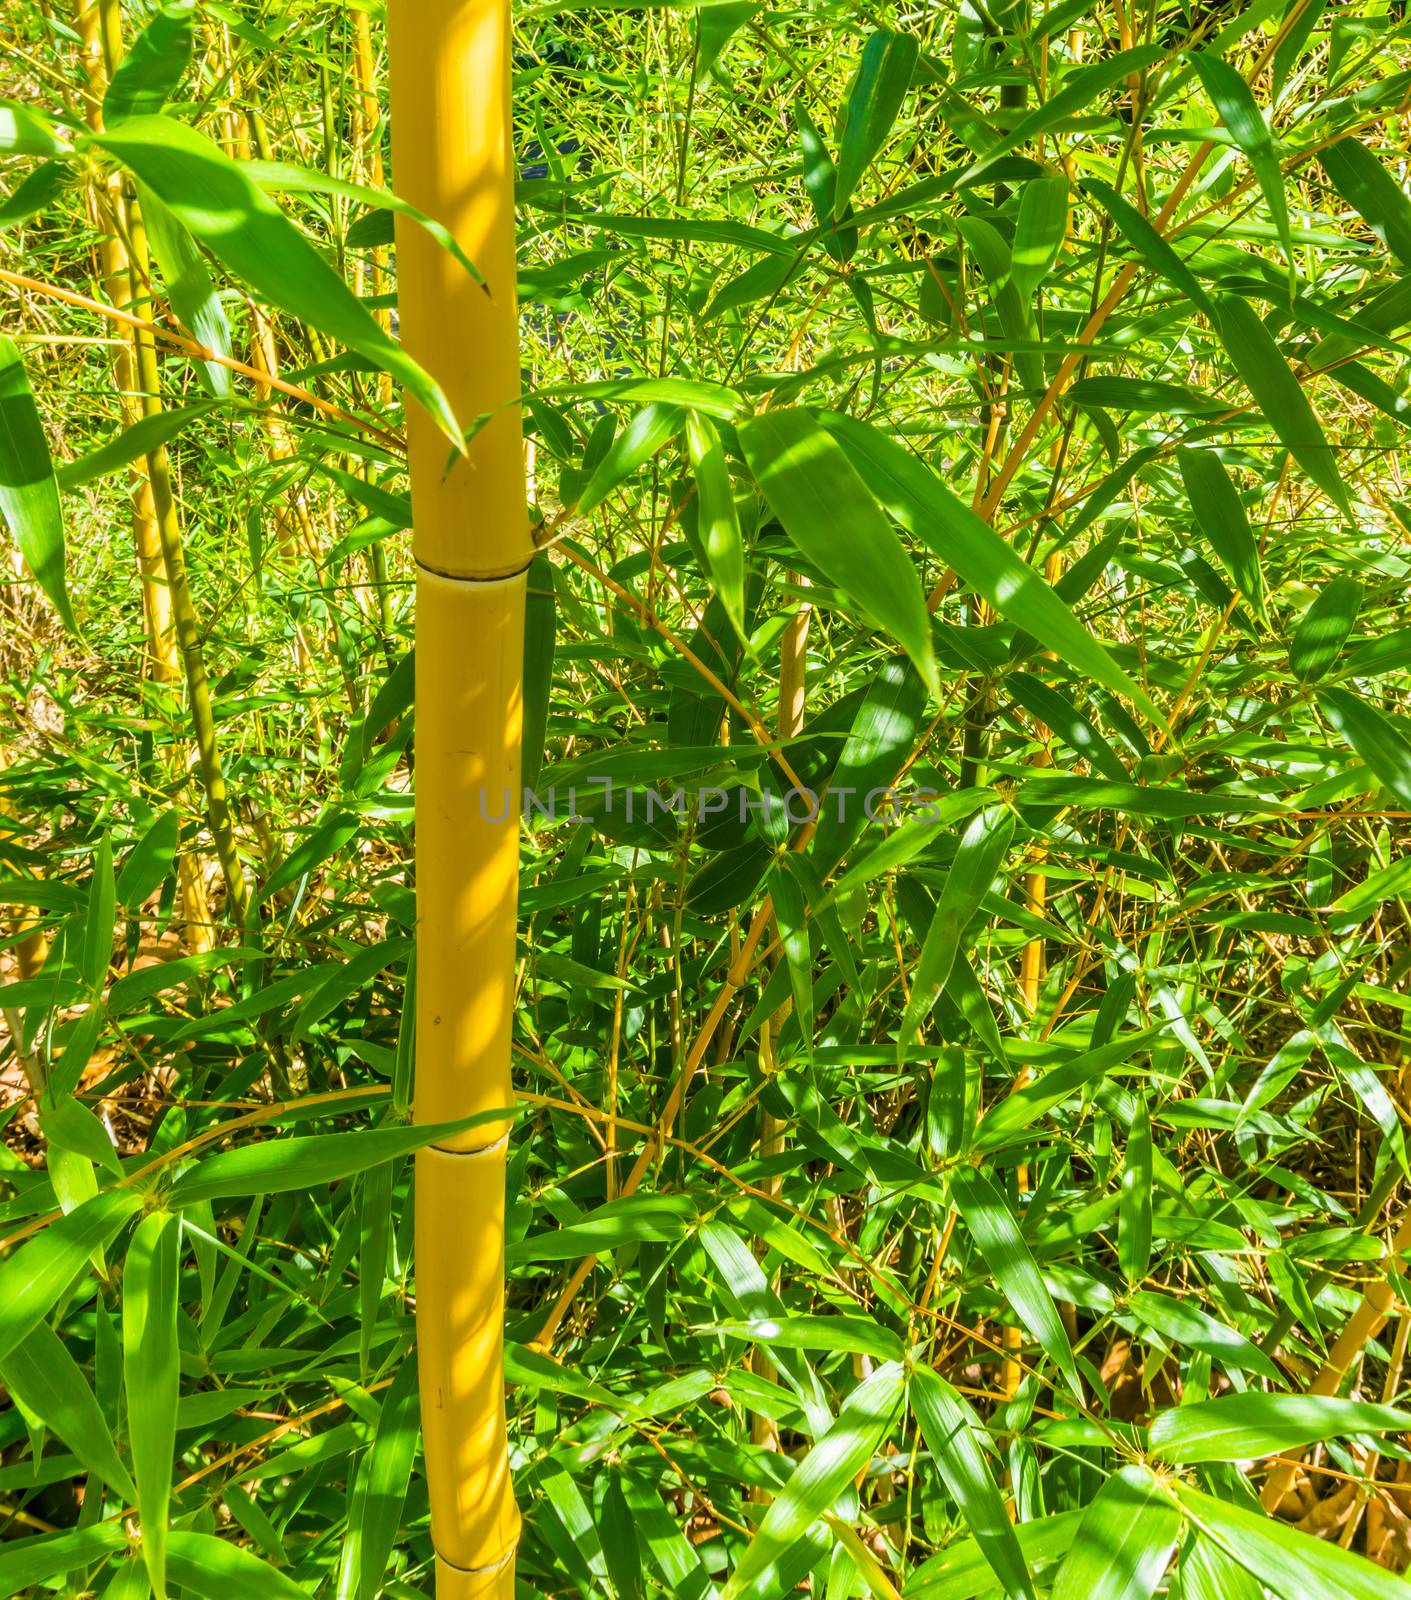 Bamboo plant tree trunk with green leaves close up textured background by charlottebleijenberg